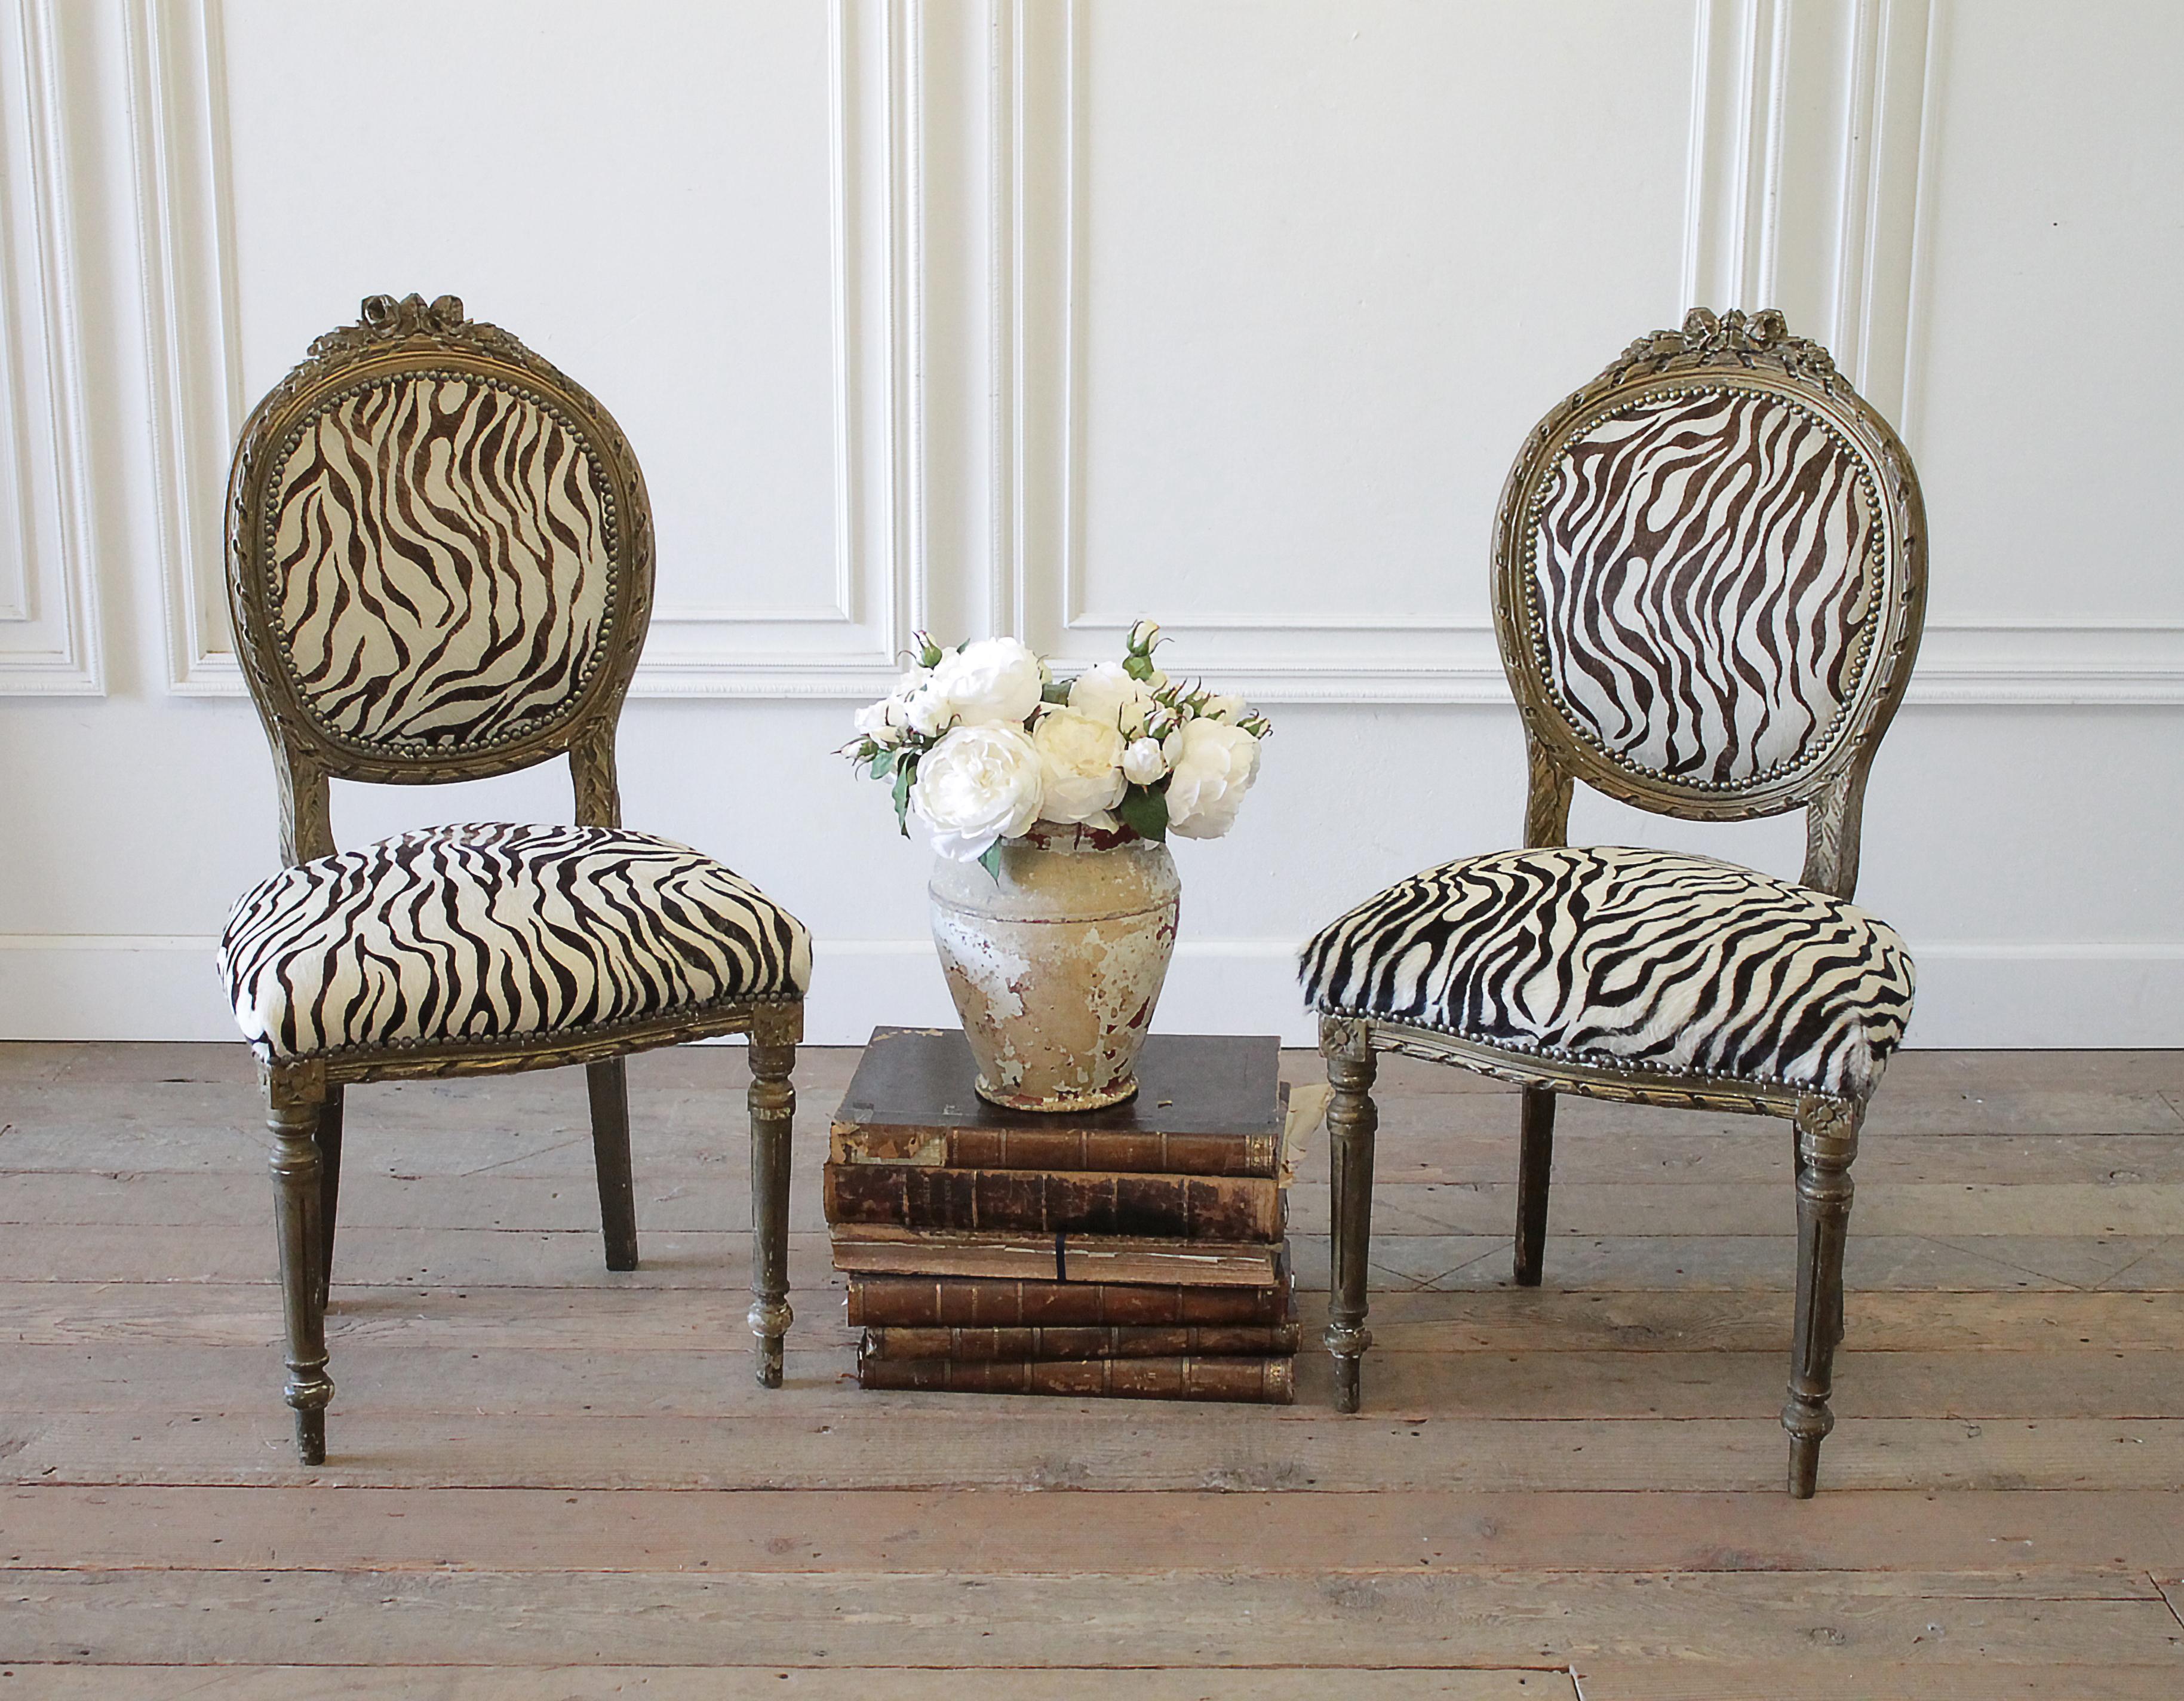 20th century carved giltwood zebra upholstered Louis XVI style chairs
Gilt finish has an aged patina, with chipping exposing a white finish underneath. Legs are solid and sturdy. Upholstery is done in a zebra style printed hair on hide, with